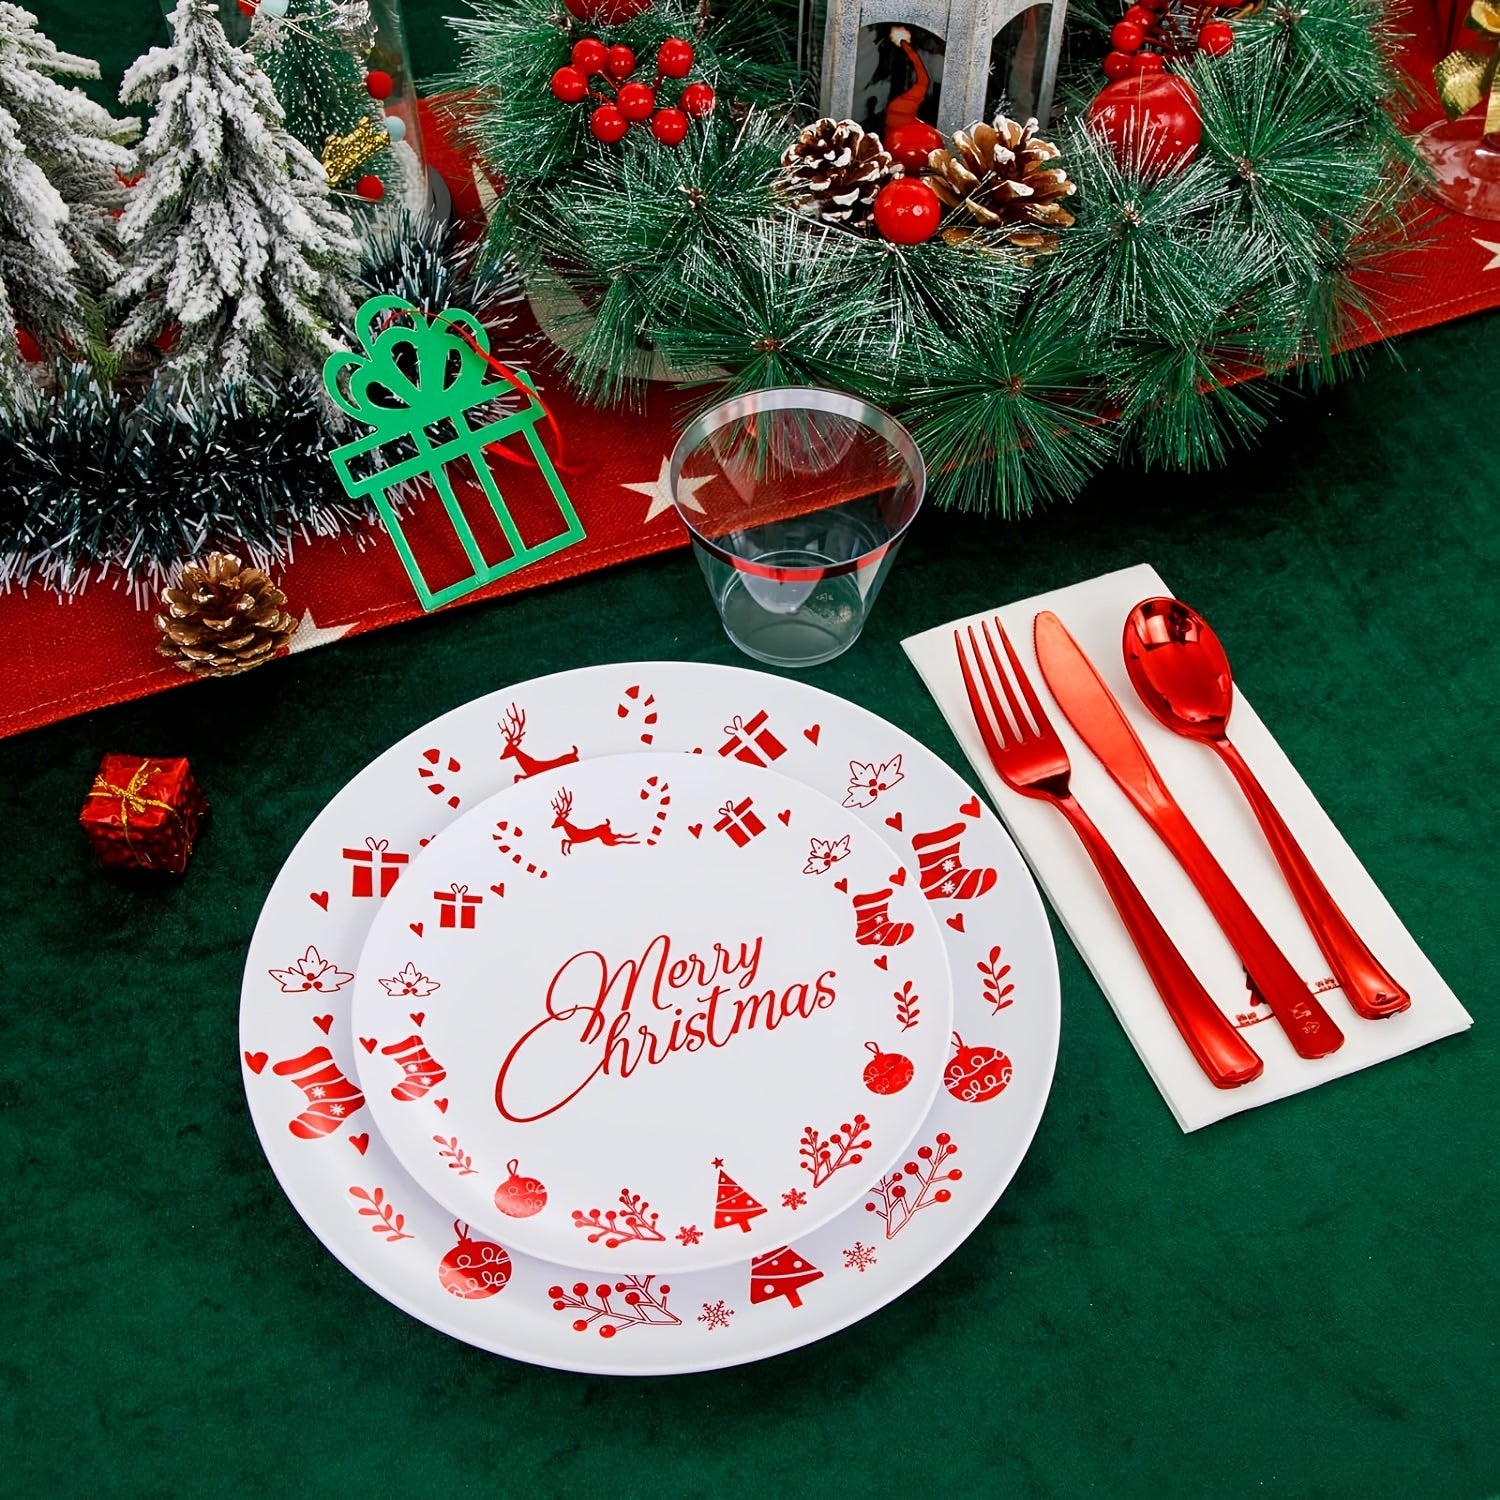 175PCS Red and White Plastic Plates - Disposable Christmas Plastic Plates Include 25 Dessert Plates, 25 Dinner Plates, 25 Knives, 25 Spoons, 25 Forks, 25 Cups, 25 Napkins Bee's to Find